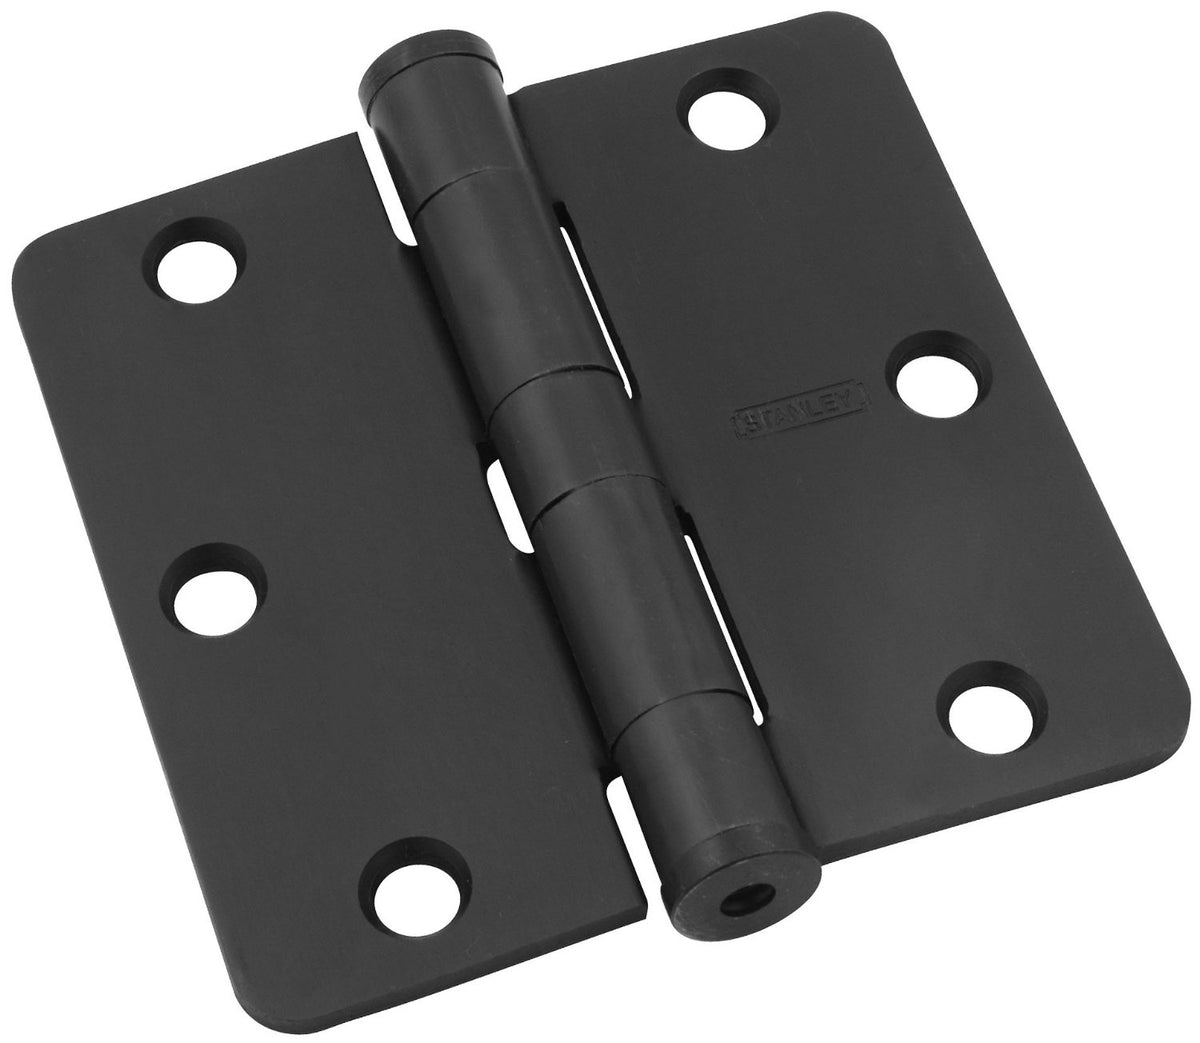 Stanley S820-753 RPRDF179 Standard Weight Hinge, 3-1/2", Oil Rubbed Bronze